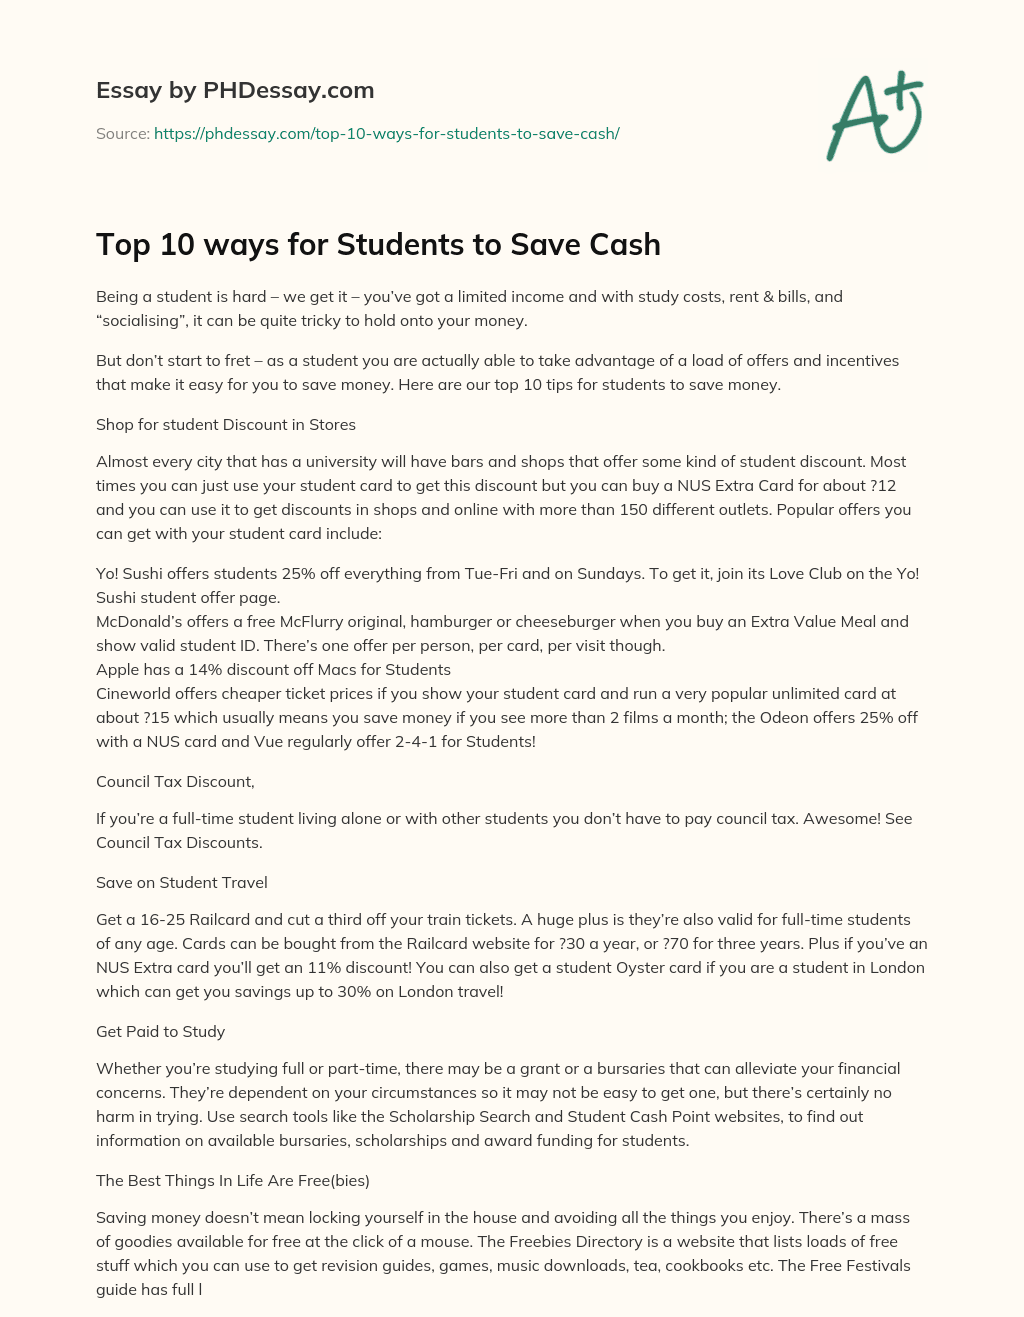 Top 10 ways for Students to Save Cash essay